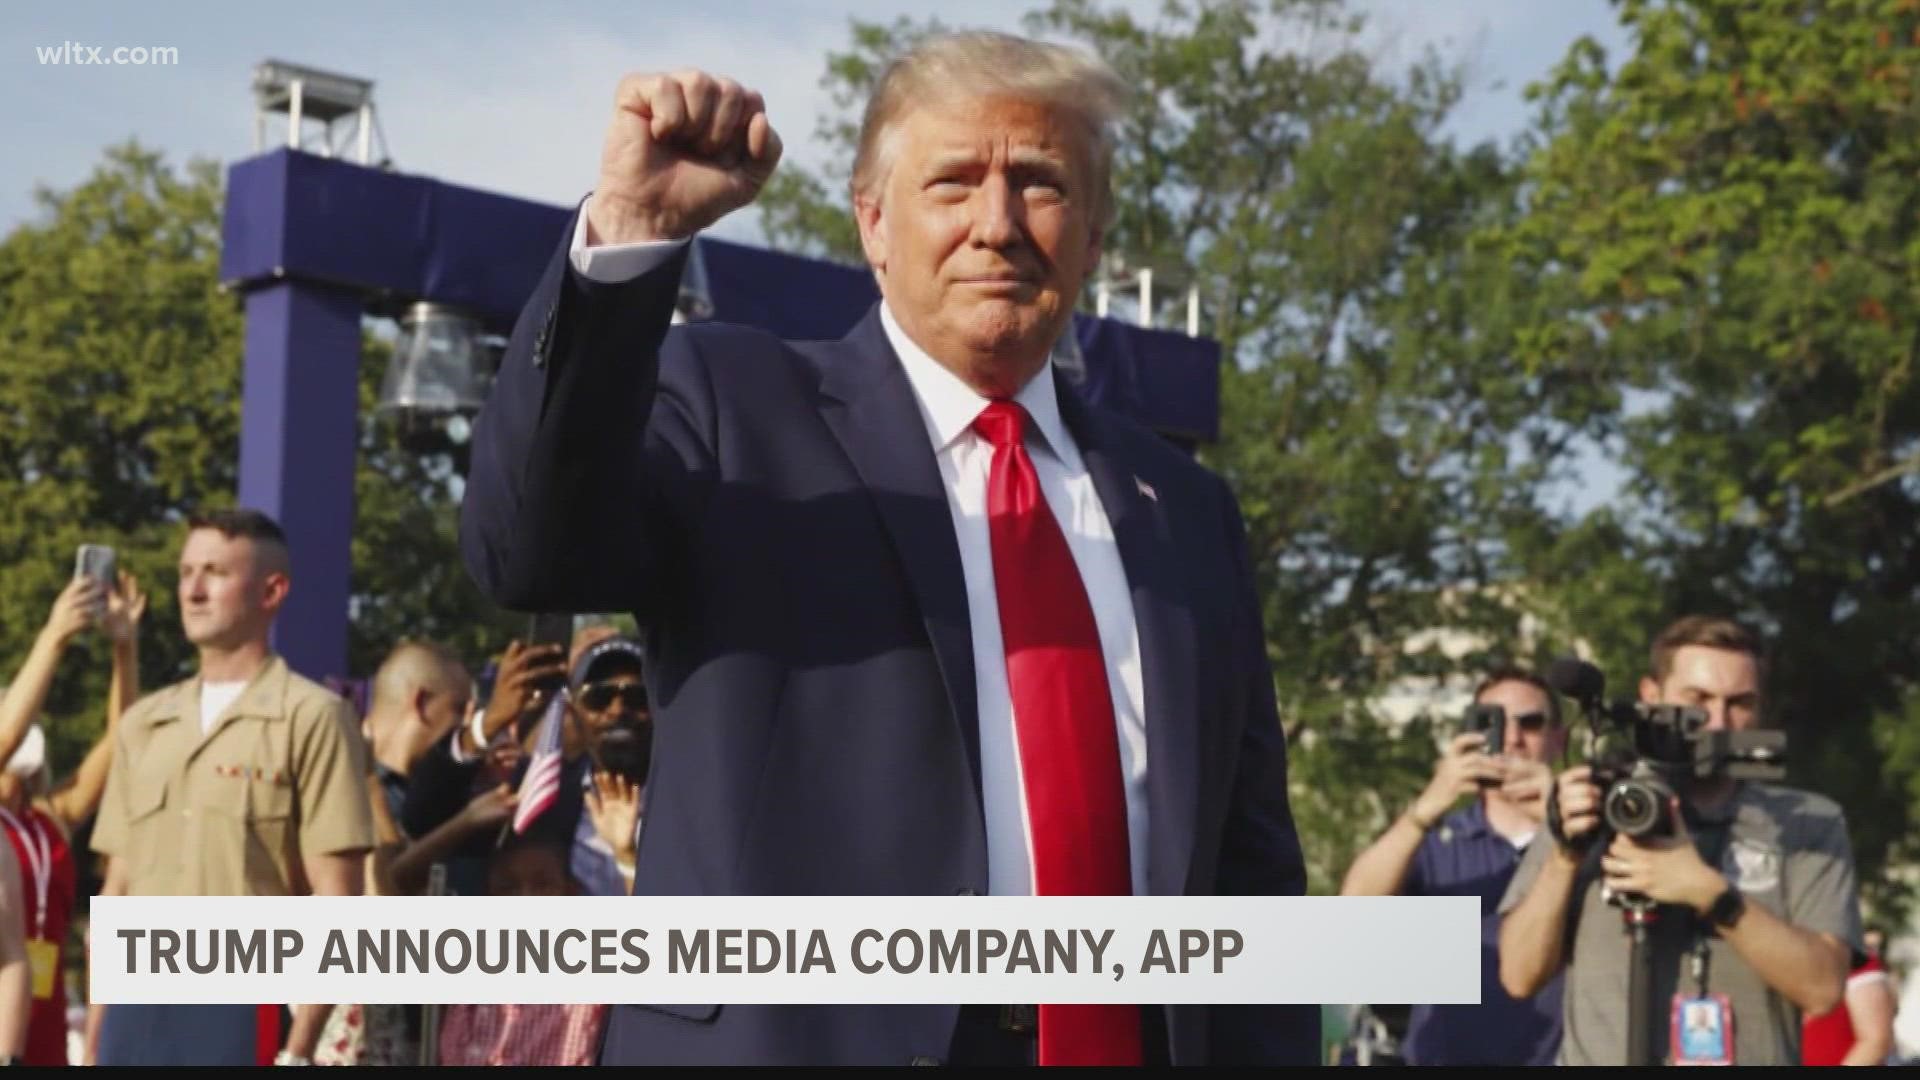 Former President Donald Trump said Wednesday he's launching a new media company with its own social media platform.